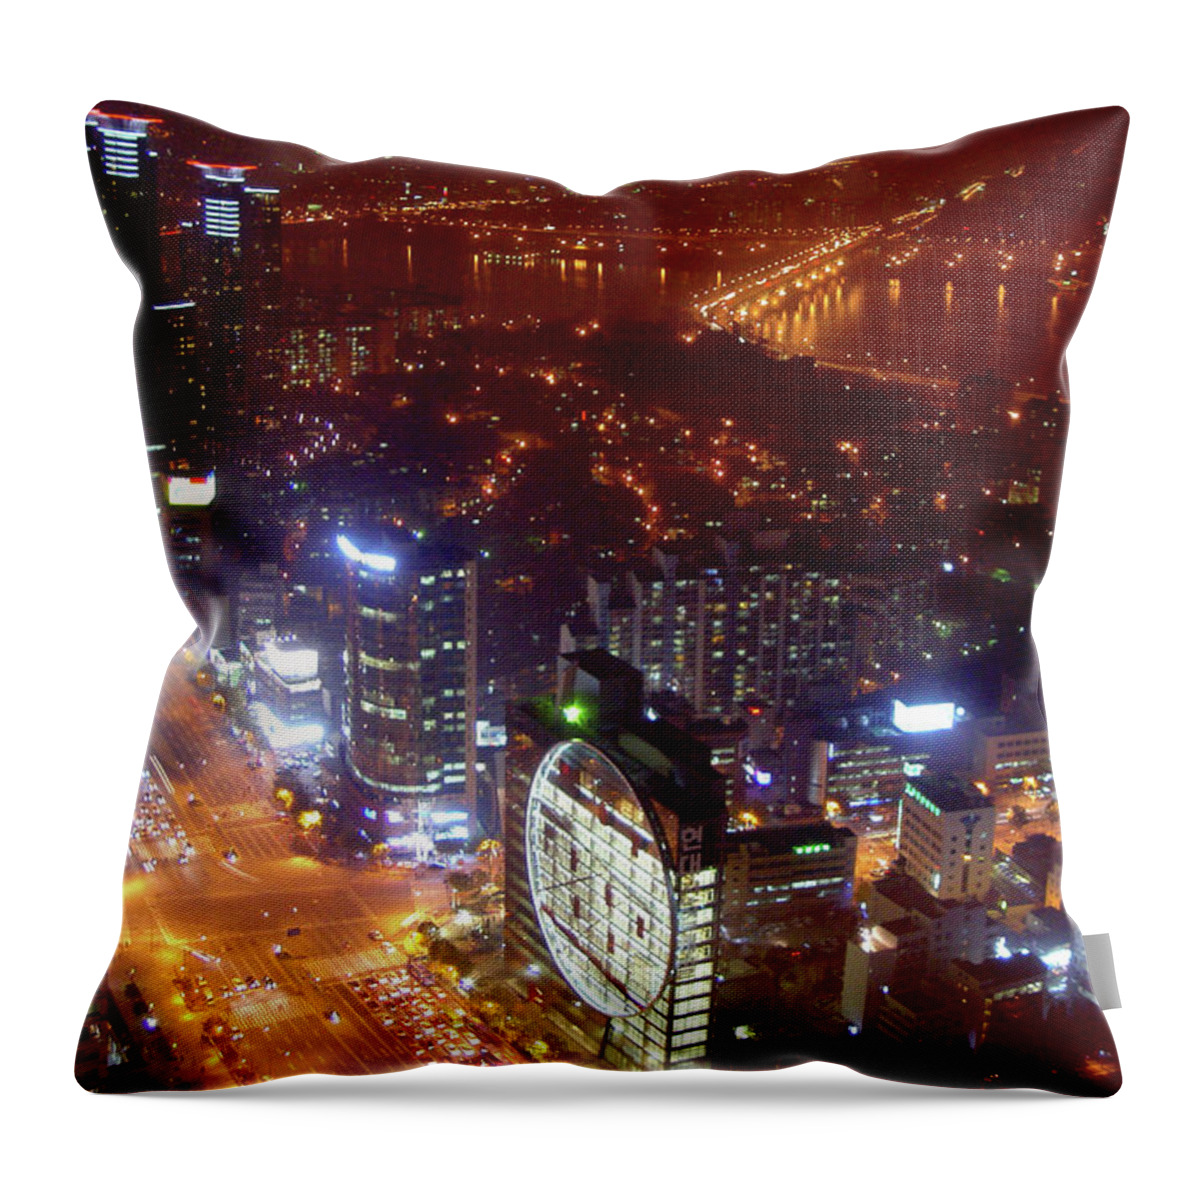 Tranquility Throw Pillow featuring the photograph Seoul Night by Floridapfe From S.korea Kim In Cherl